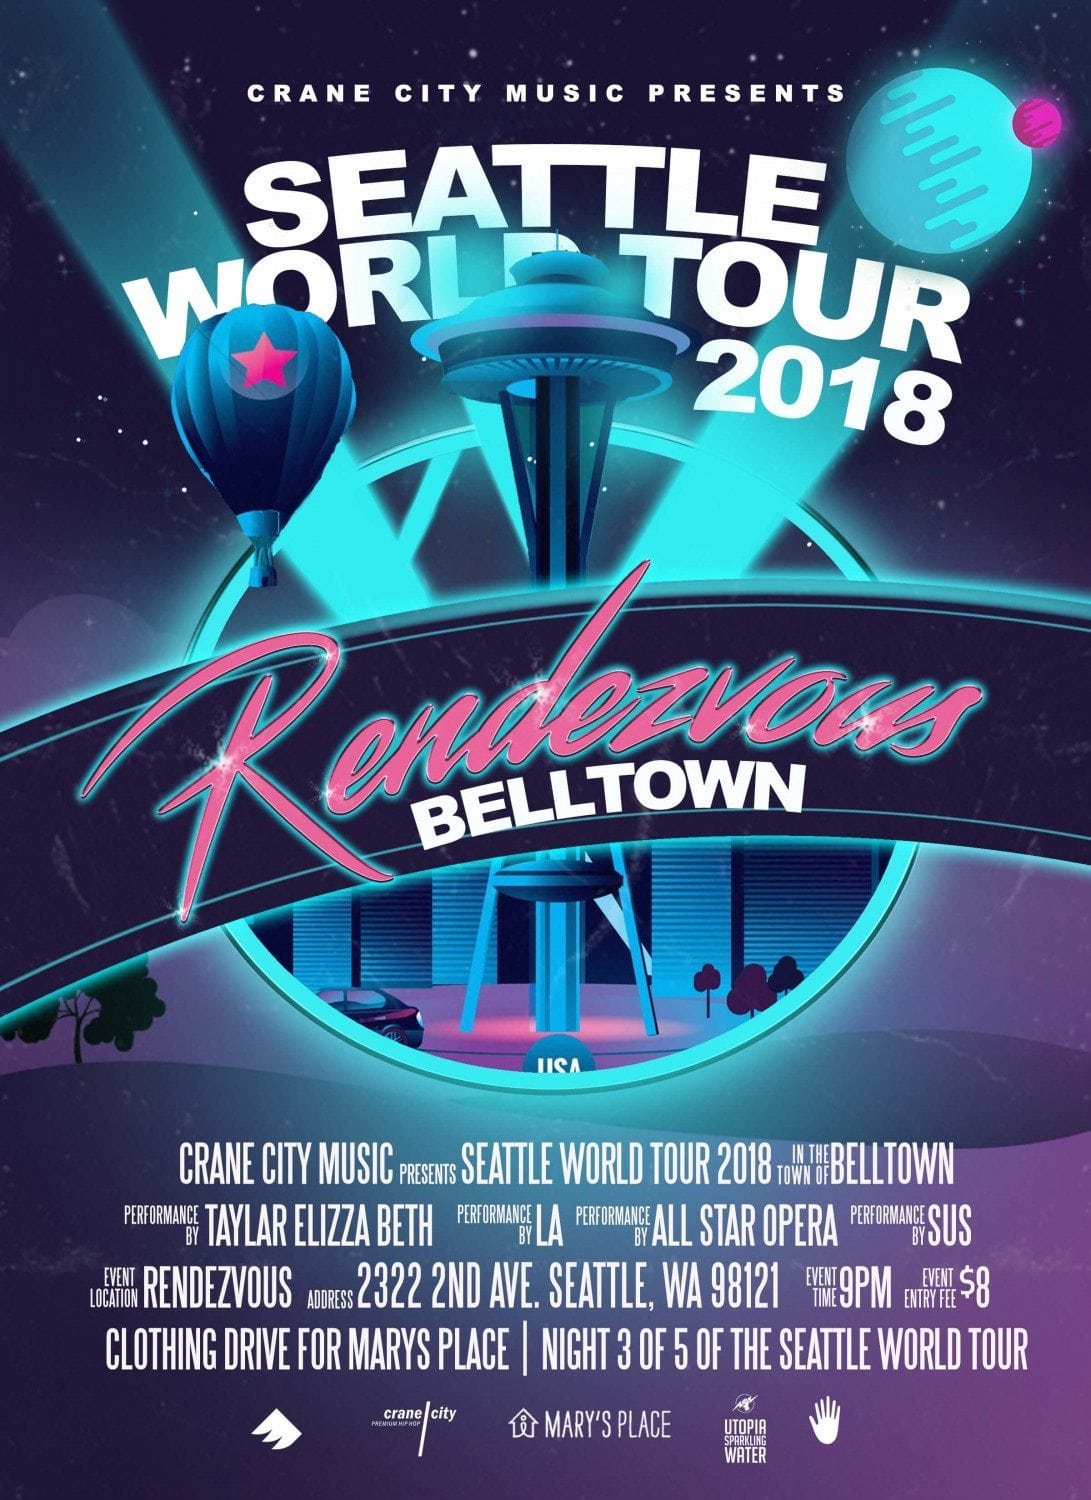 Seattle World Tour Presented By Respect My Region And All Star Opera